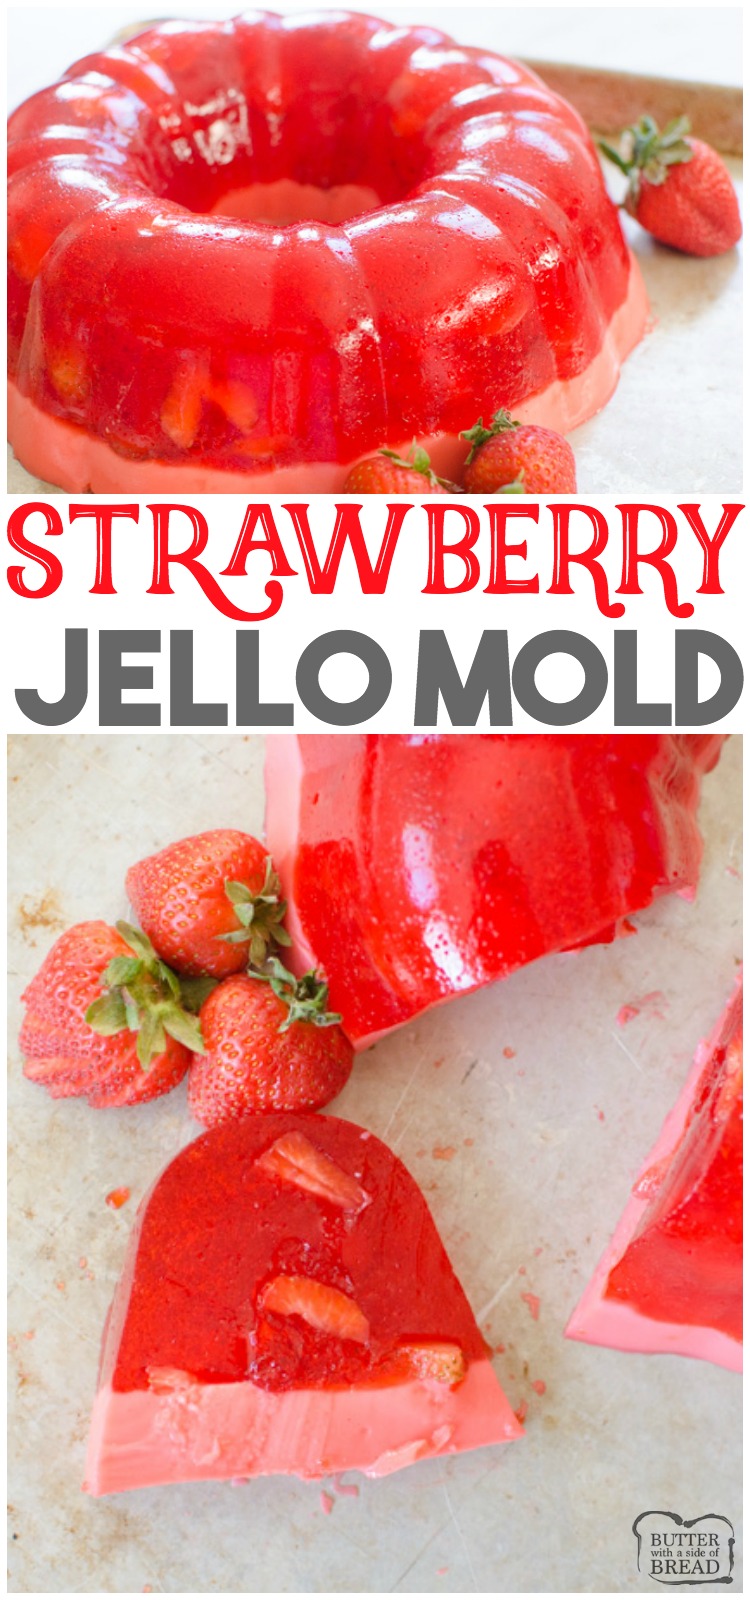 Strawberry Jello Mold is a fun way and delicious way to serve jello salad. The jello is set in a bundt pan & has two layers, fresh strawberries in jello and a creamy sweet jello bottom layer! Perfect way to serve a fancy jello treat! #jello #strawberries #salad #fruit #Christmas #Valentines #jellosalad #jellomold #recipe from BUTTER WITH A SIDE OF BREAD